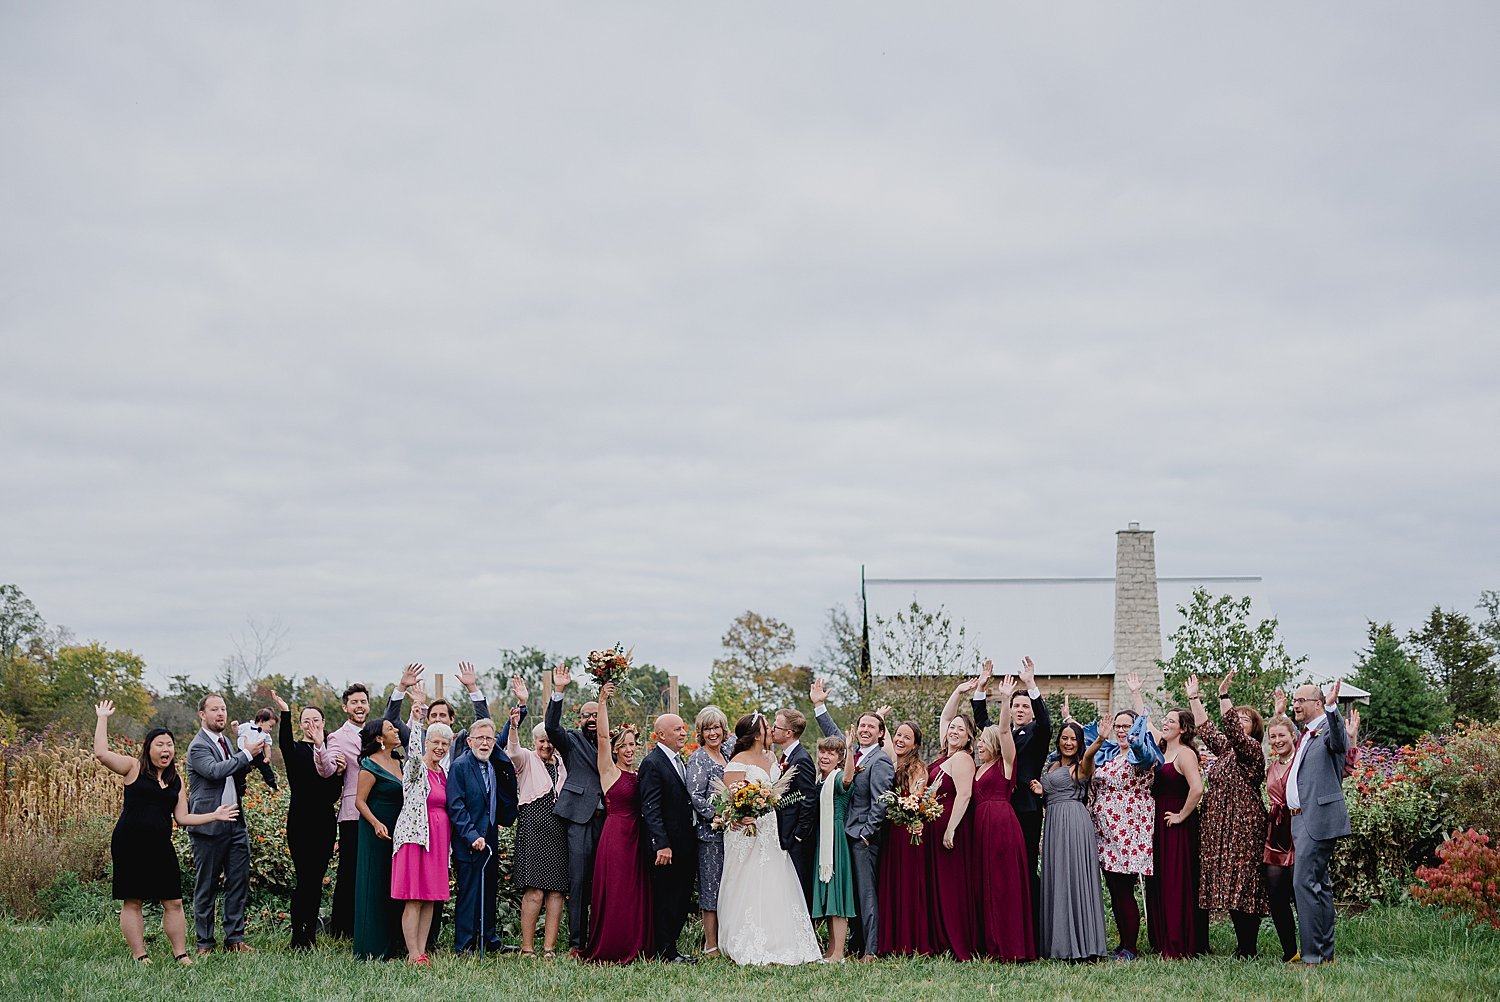 Compass Rose - Prince Edward County Wedding Venues | Holly McMurter Photographs_0007.jpg